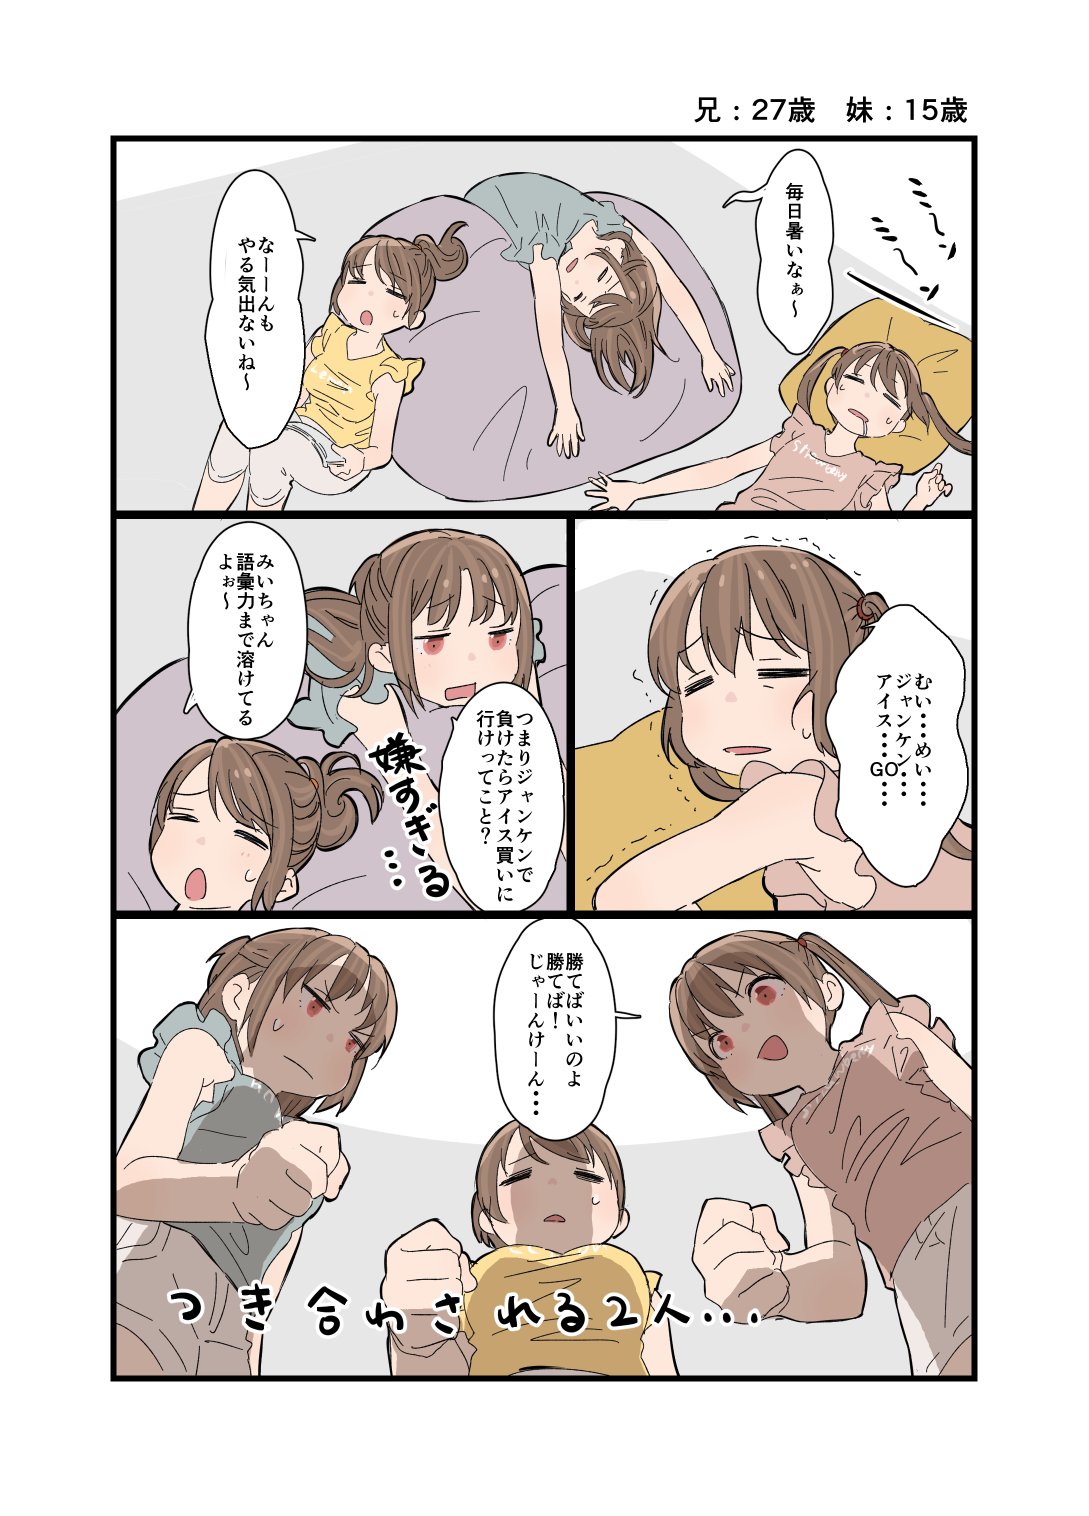 3girls bean_bag_chair blue_tank_top brown_hair character_age commentary_request drooling highres himaro lying multiple_girls original pink_eyes pink_tank_top ponytail rock_paper_scissors siblings sisters sweatdrop tagme tank_top translation_request triplets twintails yellow_tank_top